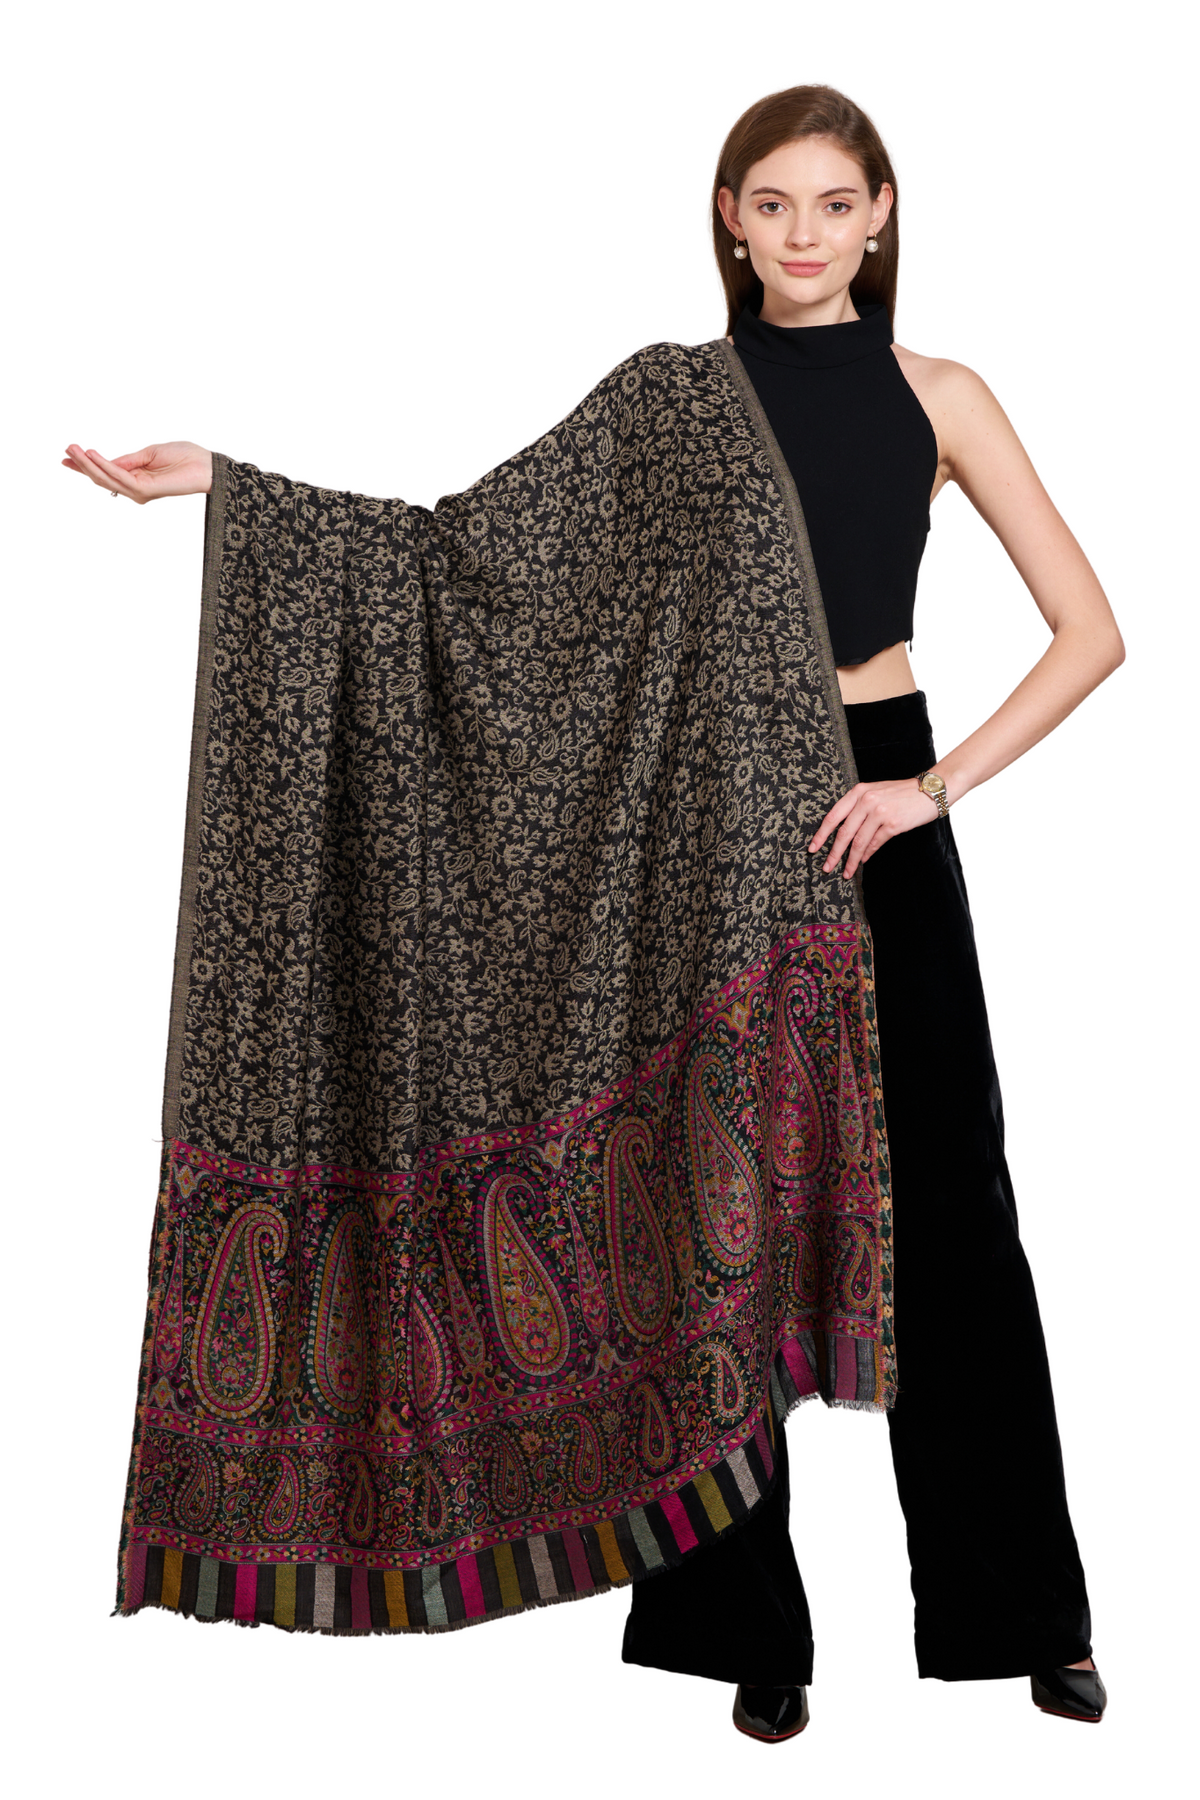 His & Her Gift Set of Men's  Zari Stole and Women's Kaani Shawl